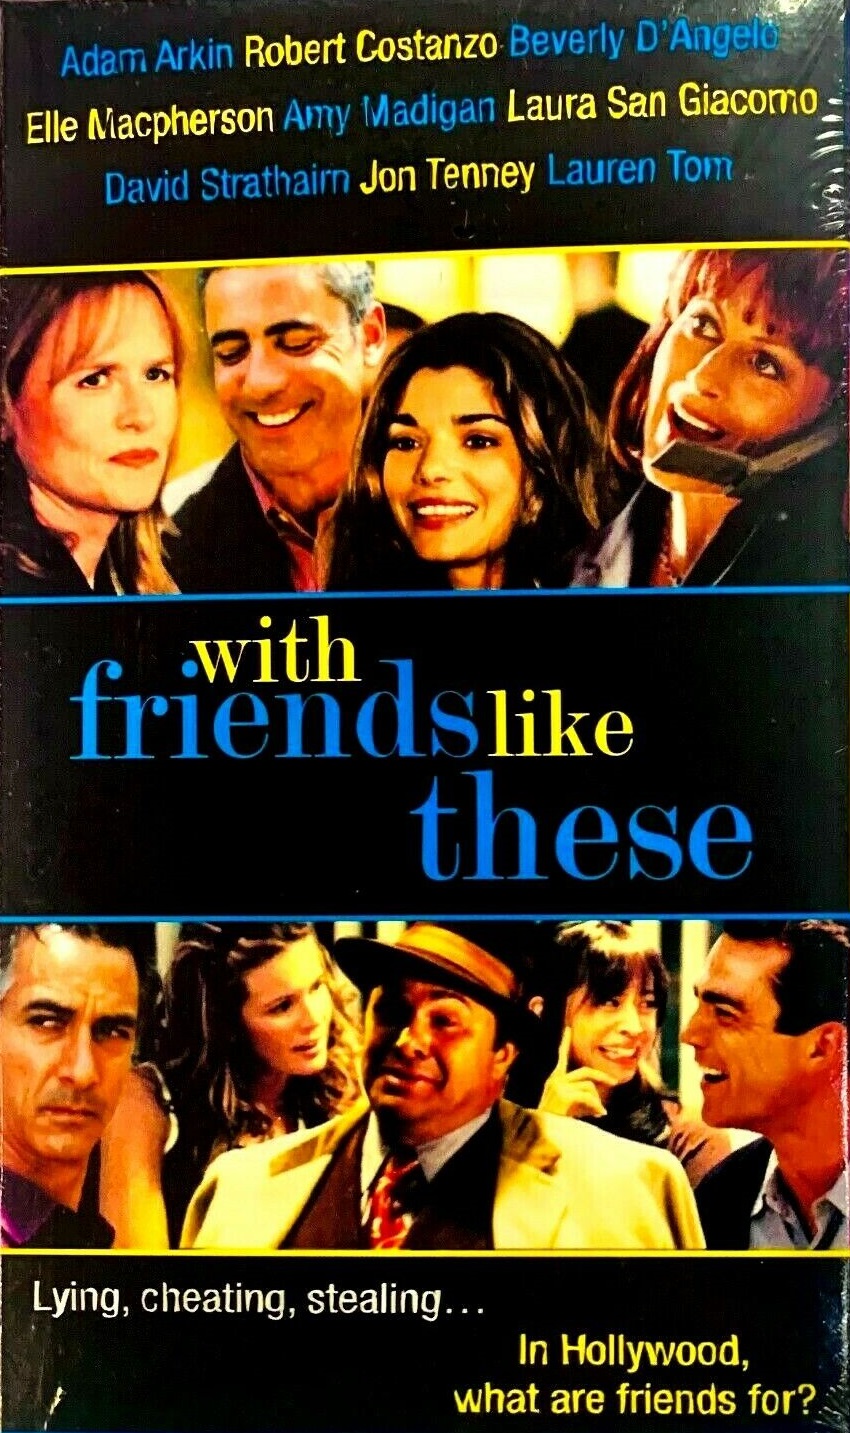 With Friends Like These (1998) Screenshot 2 